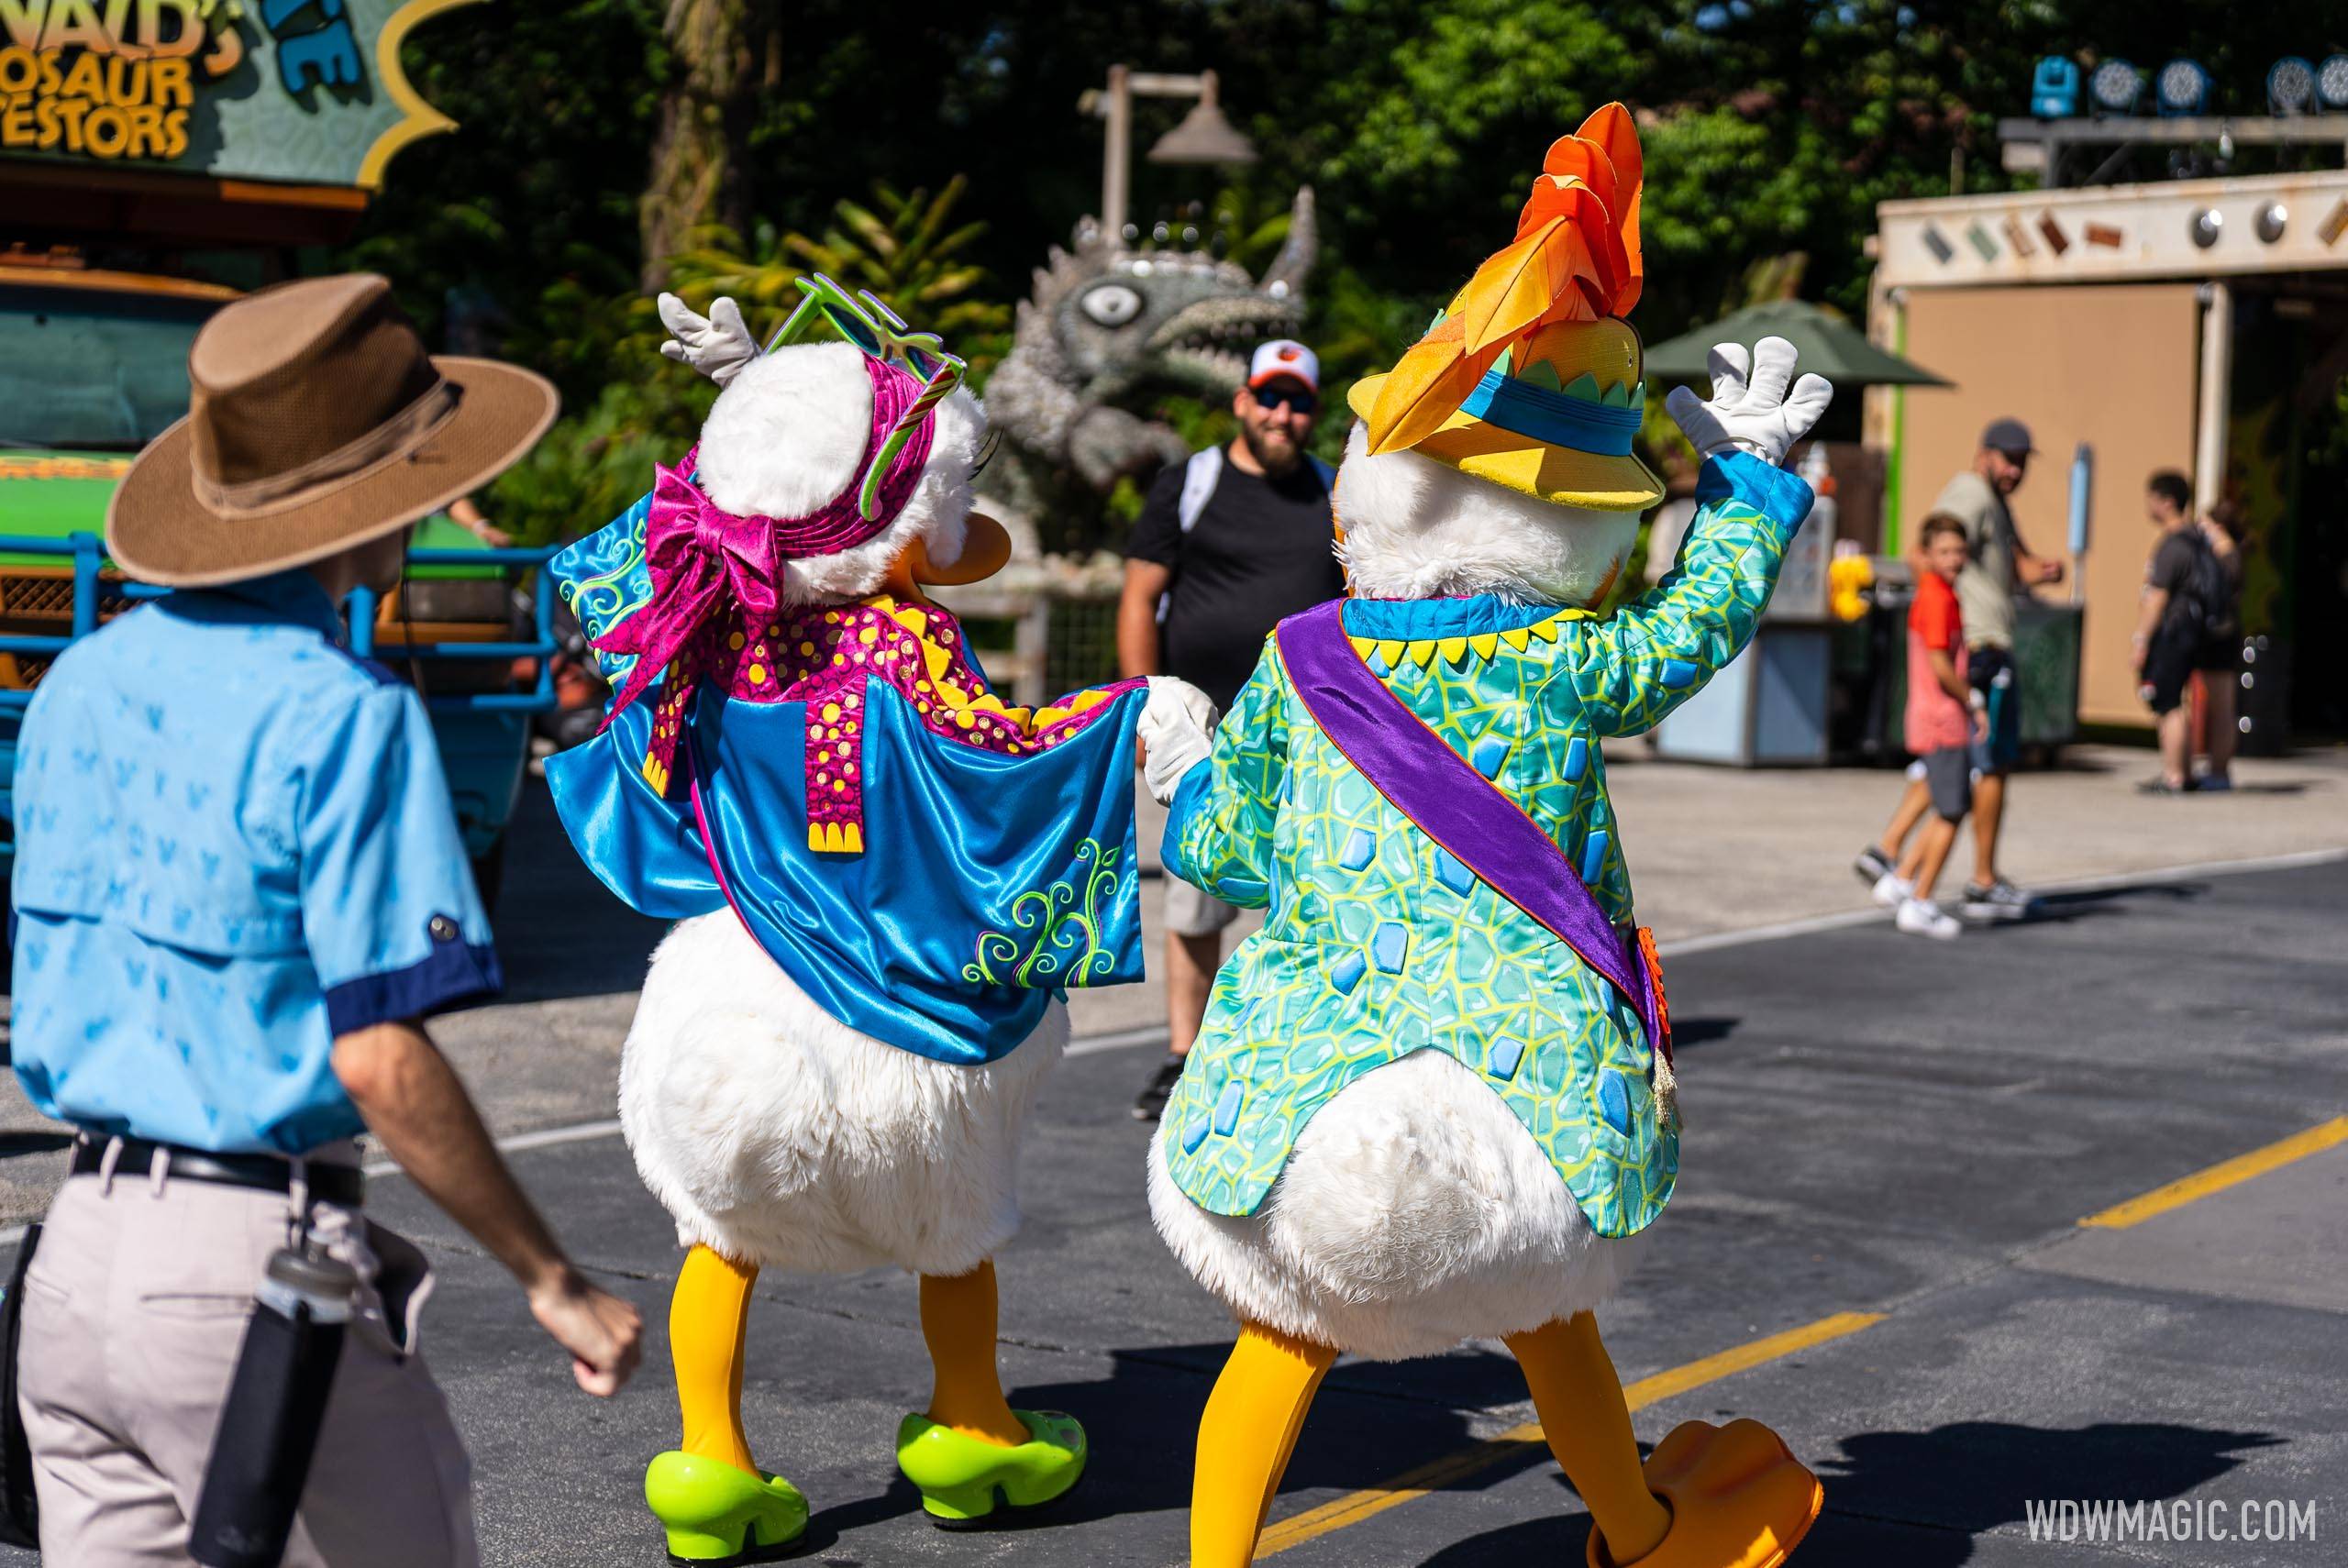 Donald Duck and Daisy Duck at Donald's Dino Bash